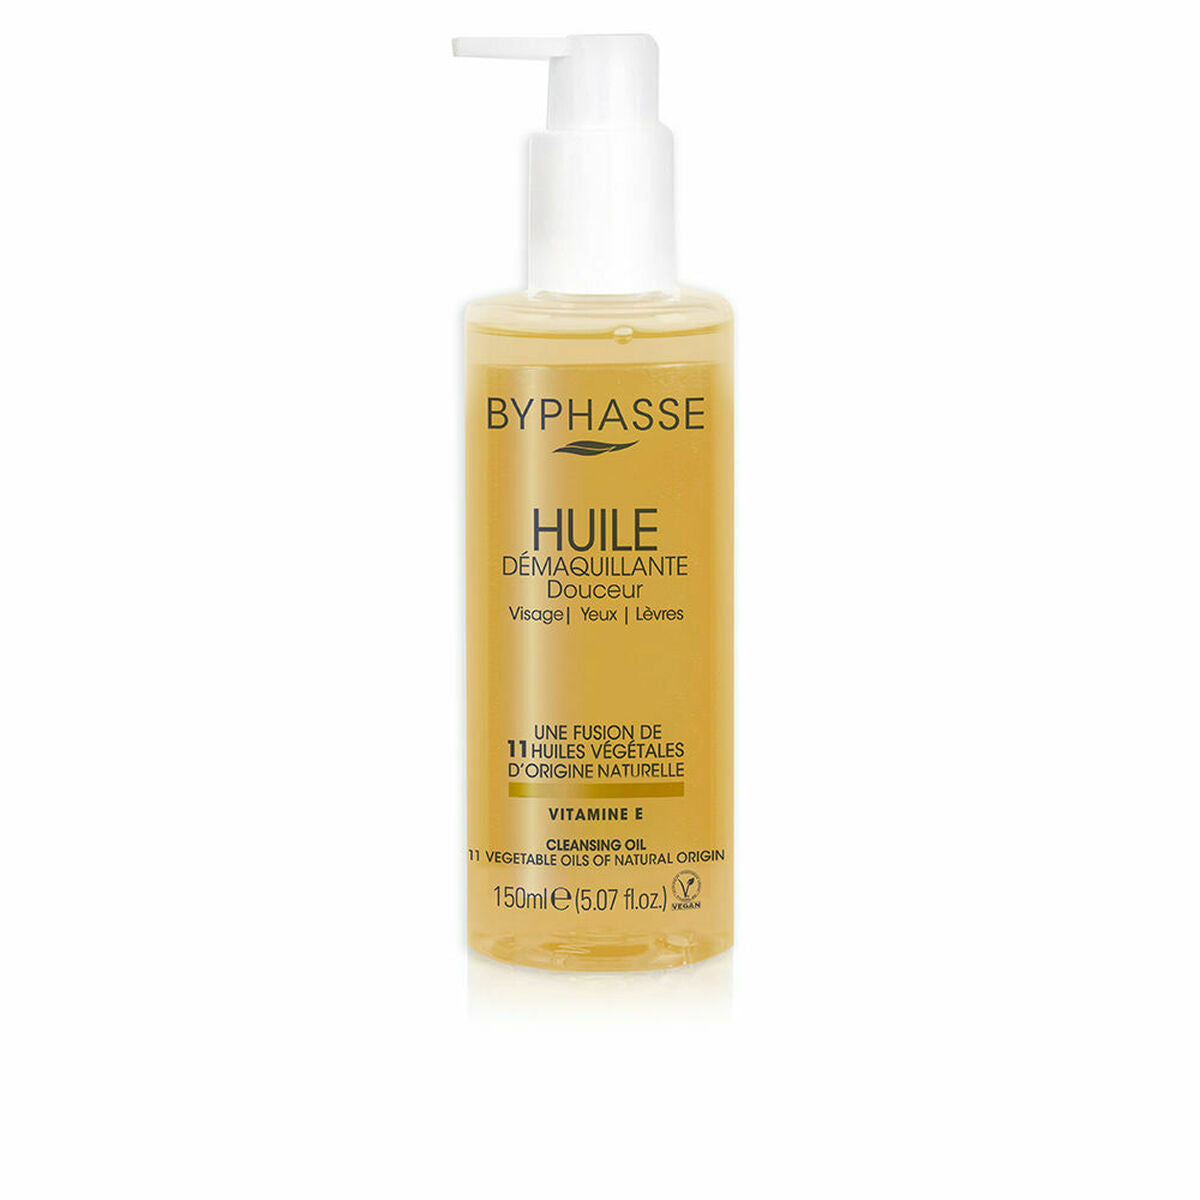 Make-up Remover Oil Byphasse Douceur (150 ml)